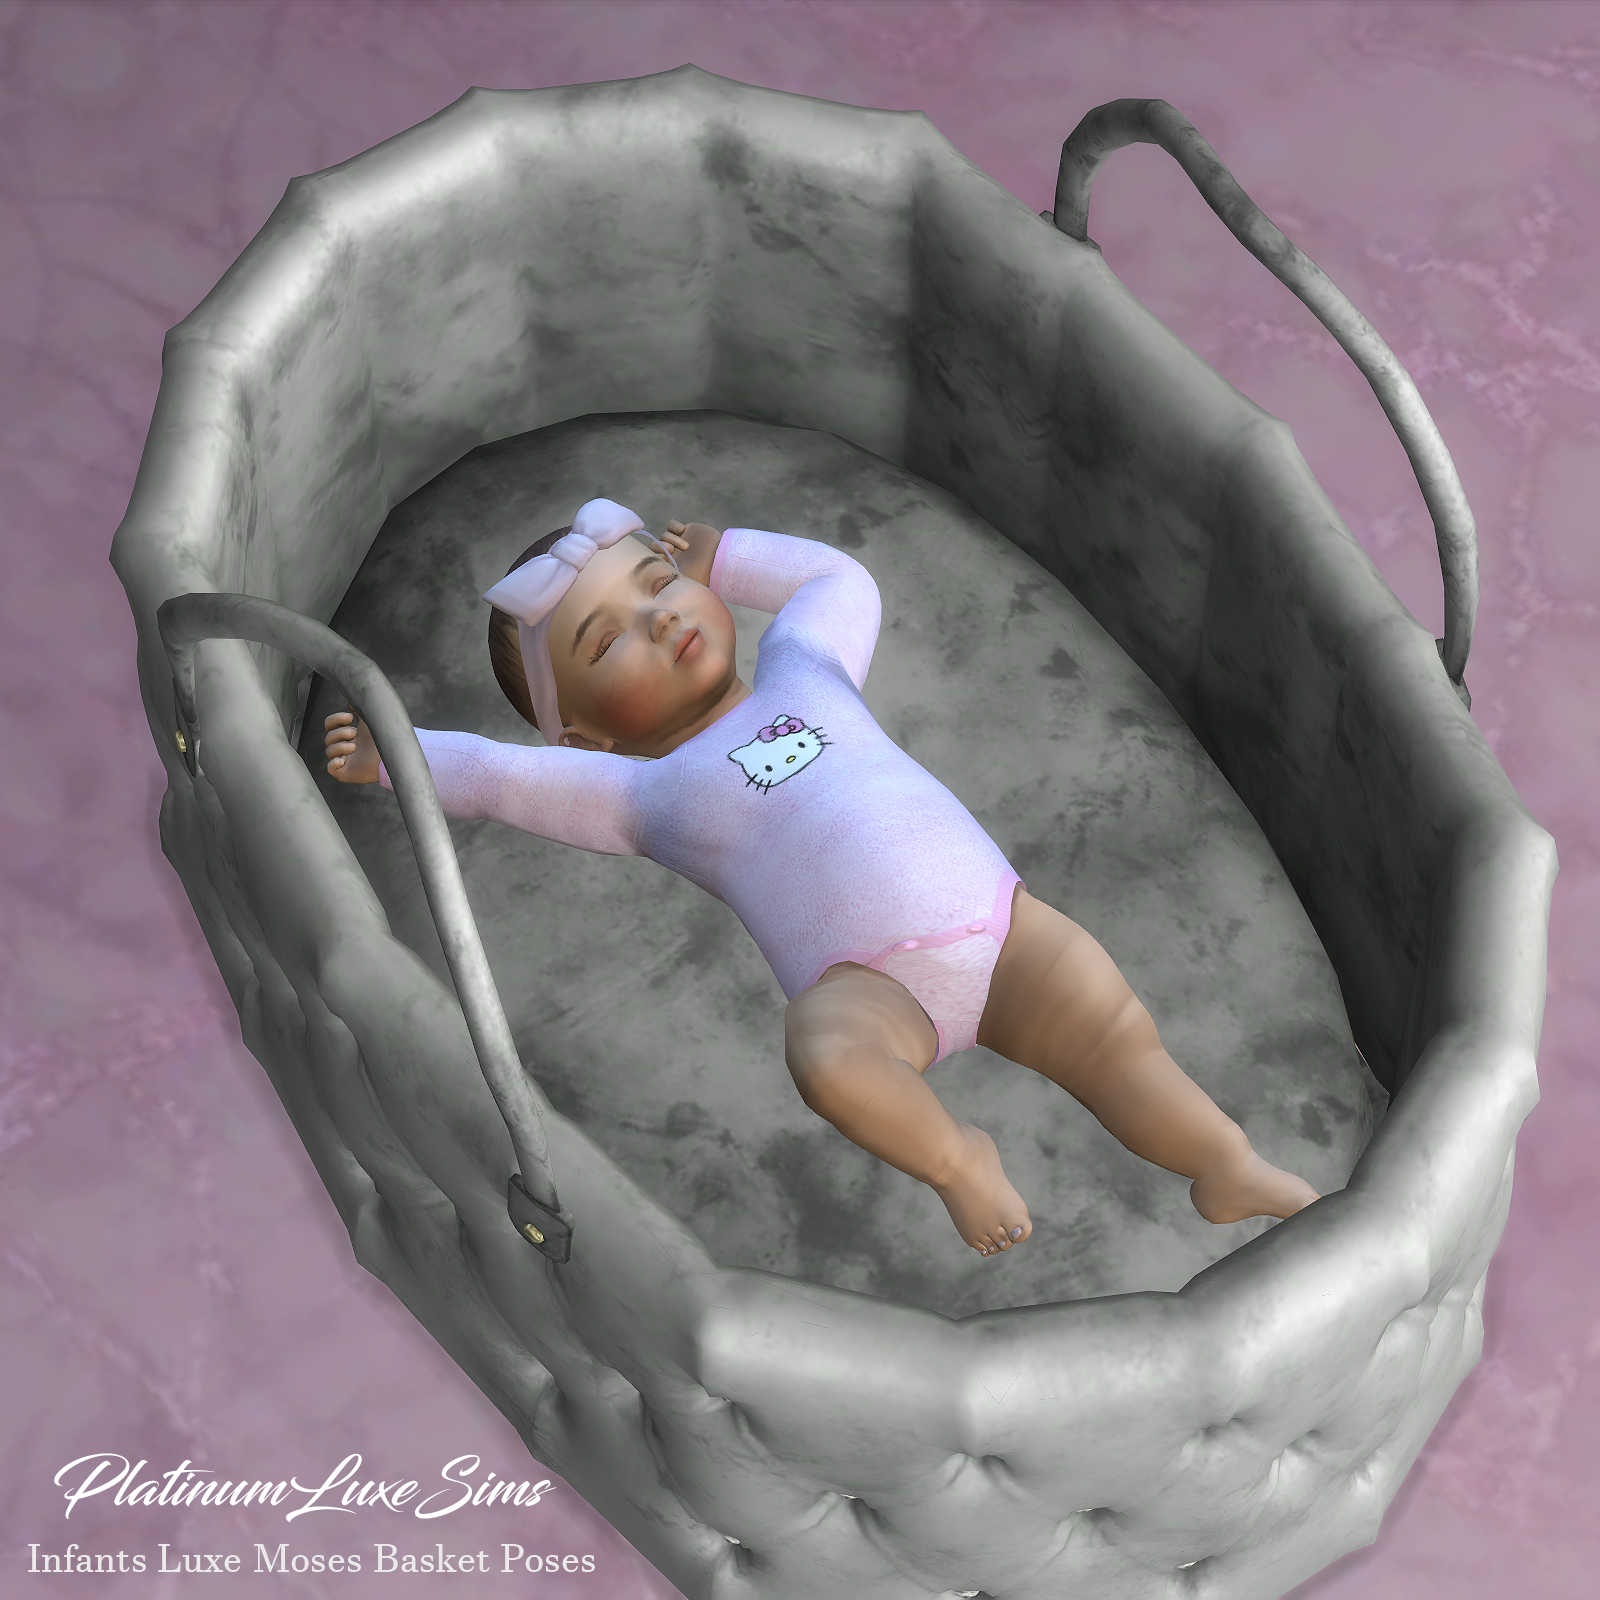 Luxe Moses Basket Poses (Infants) project avatar